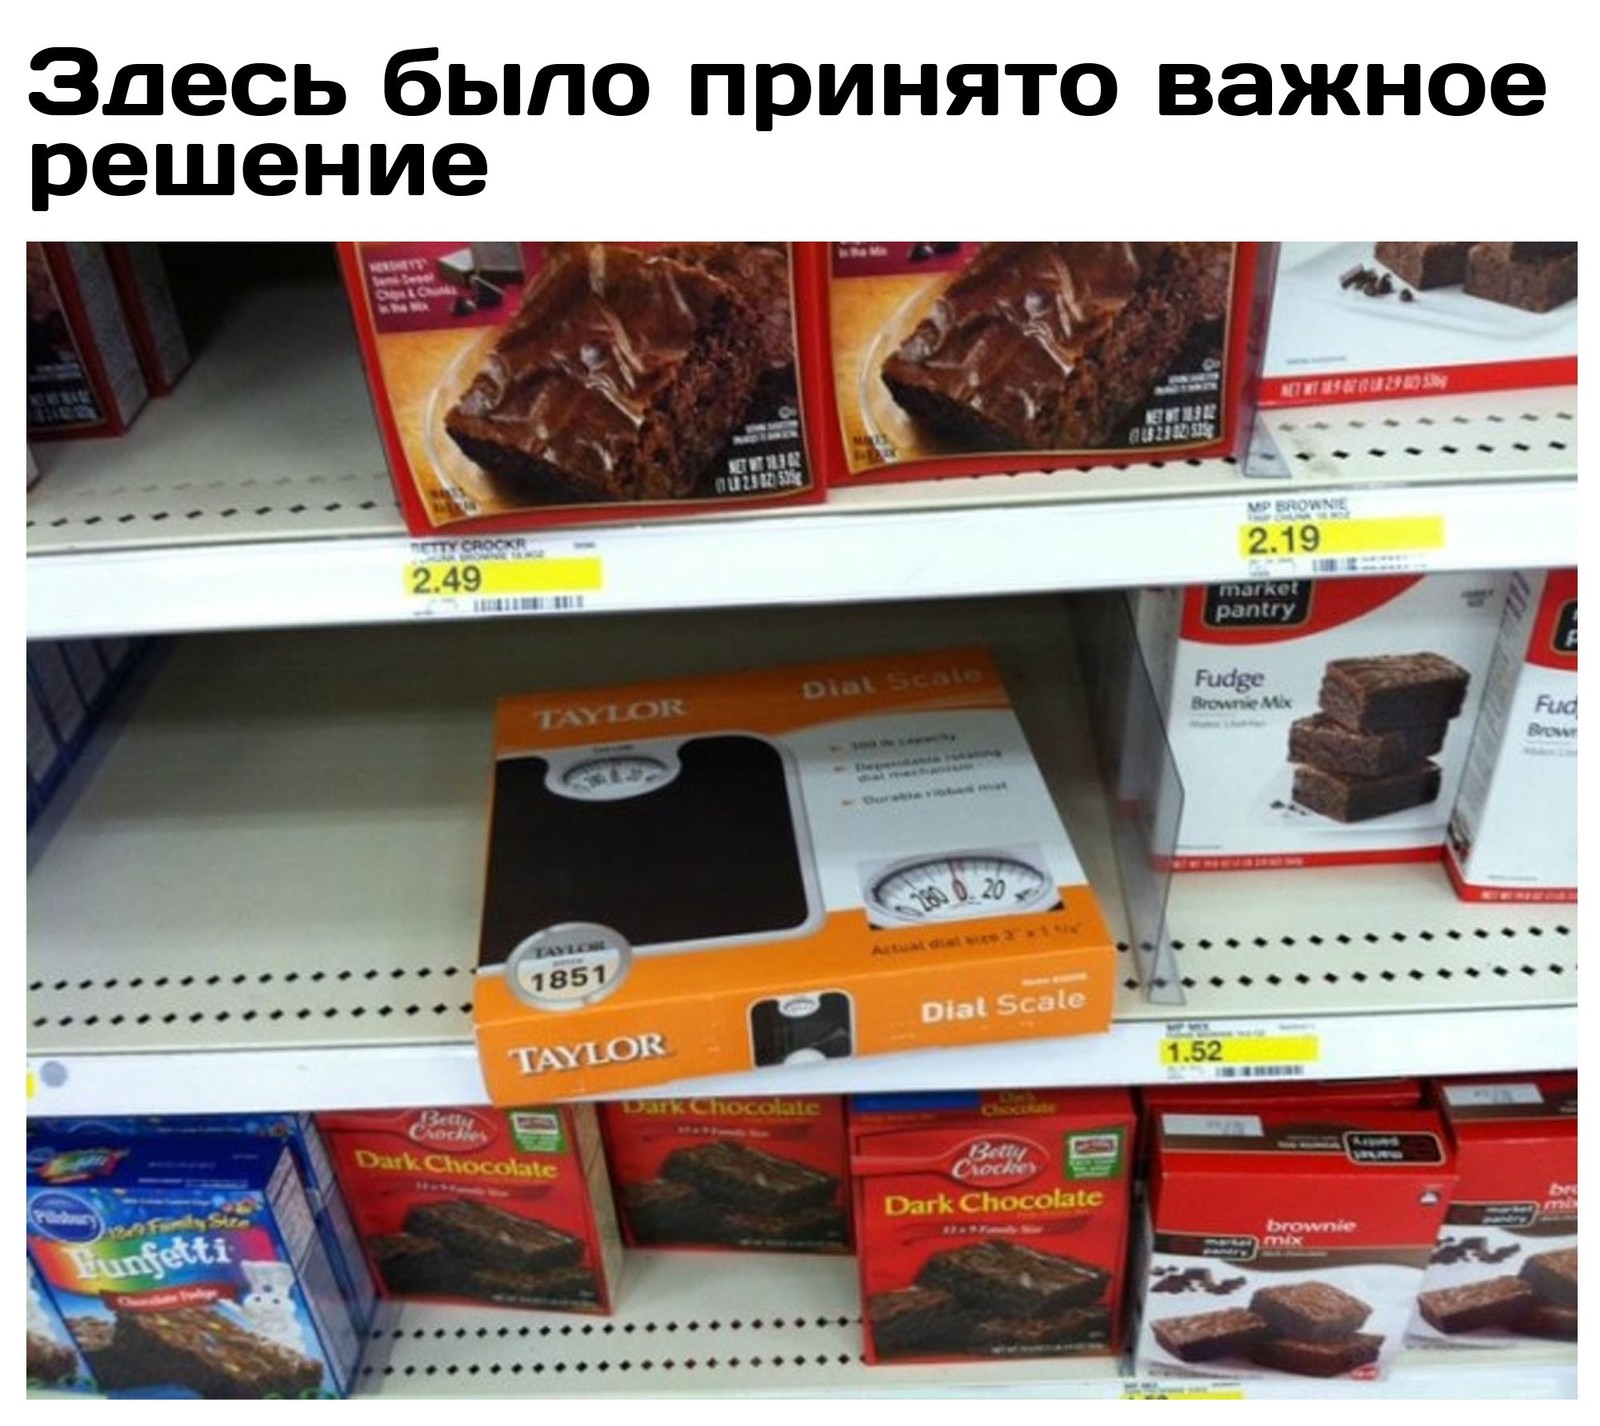 Important decision - Weight, Food, Sweets, Choice, Memes, Picture with text